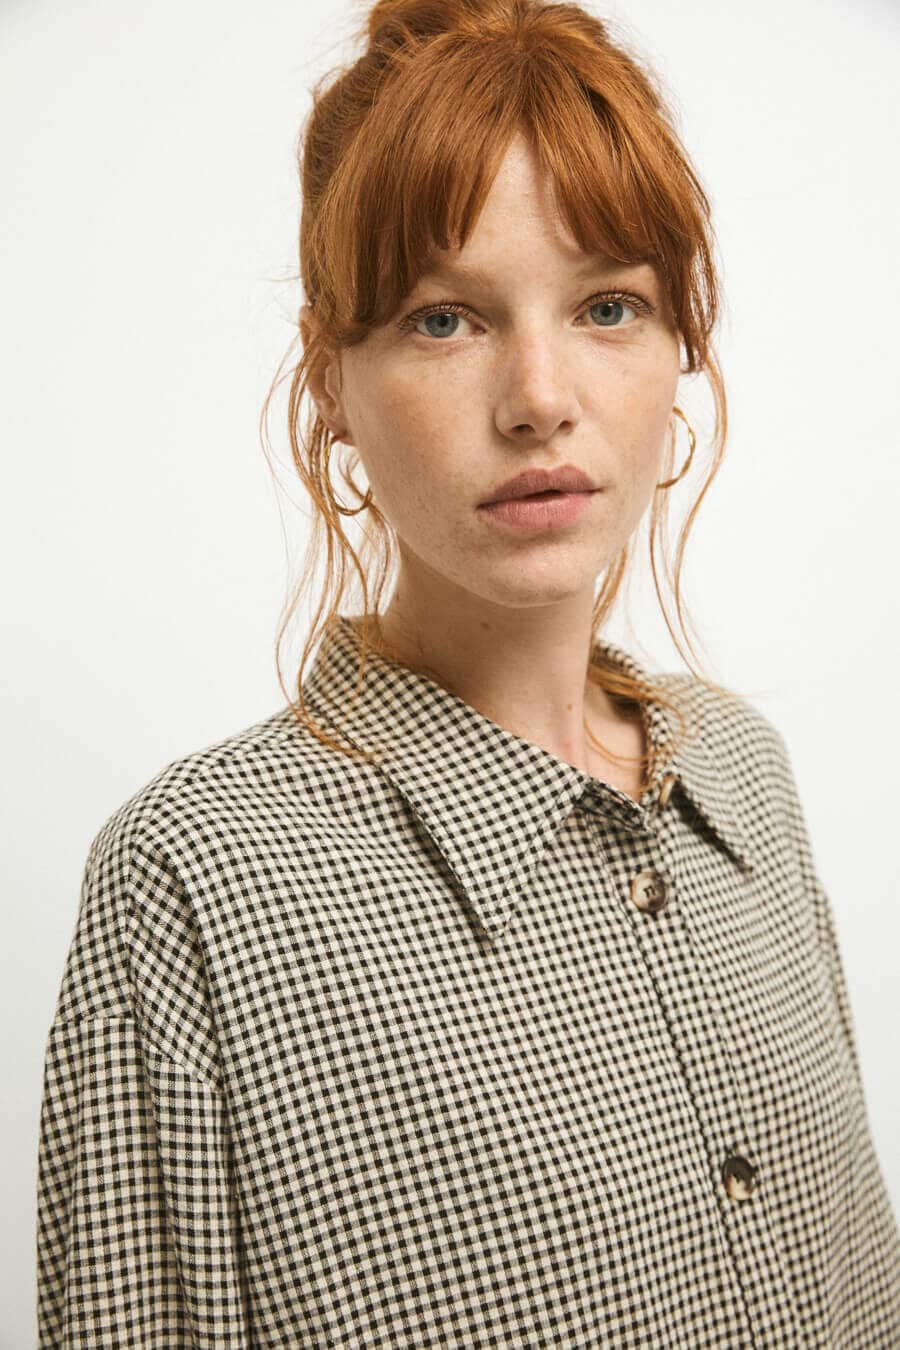 Product Image for Alicia Boyfriend Shirt, Black Gingham